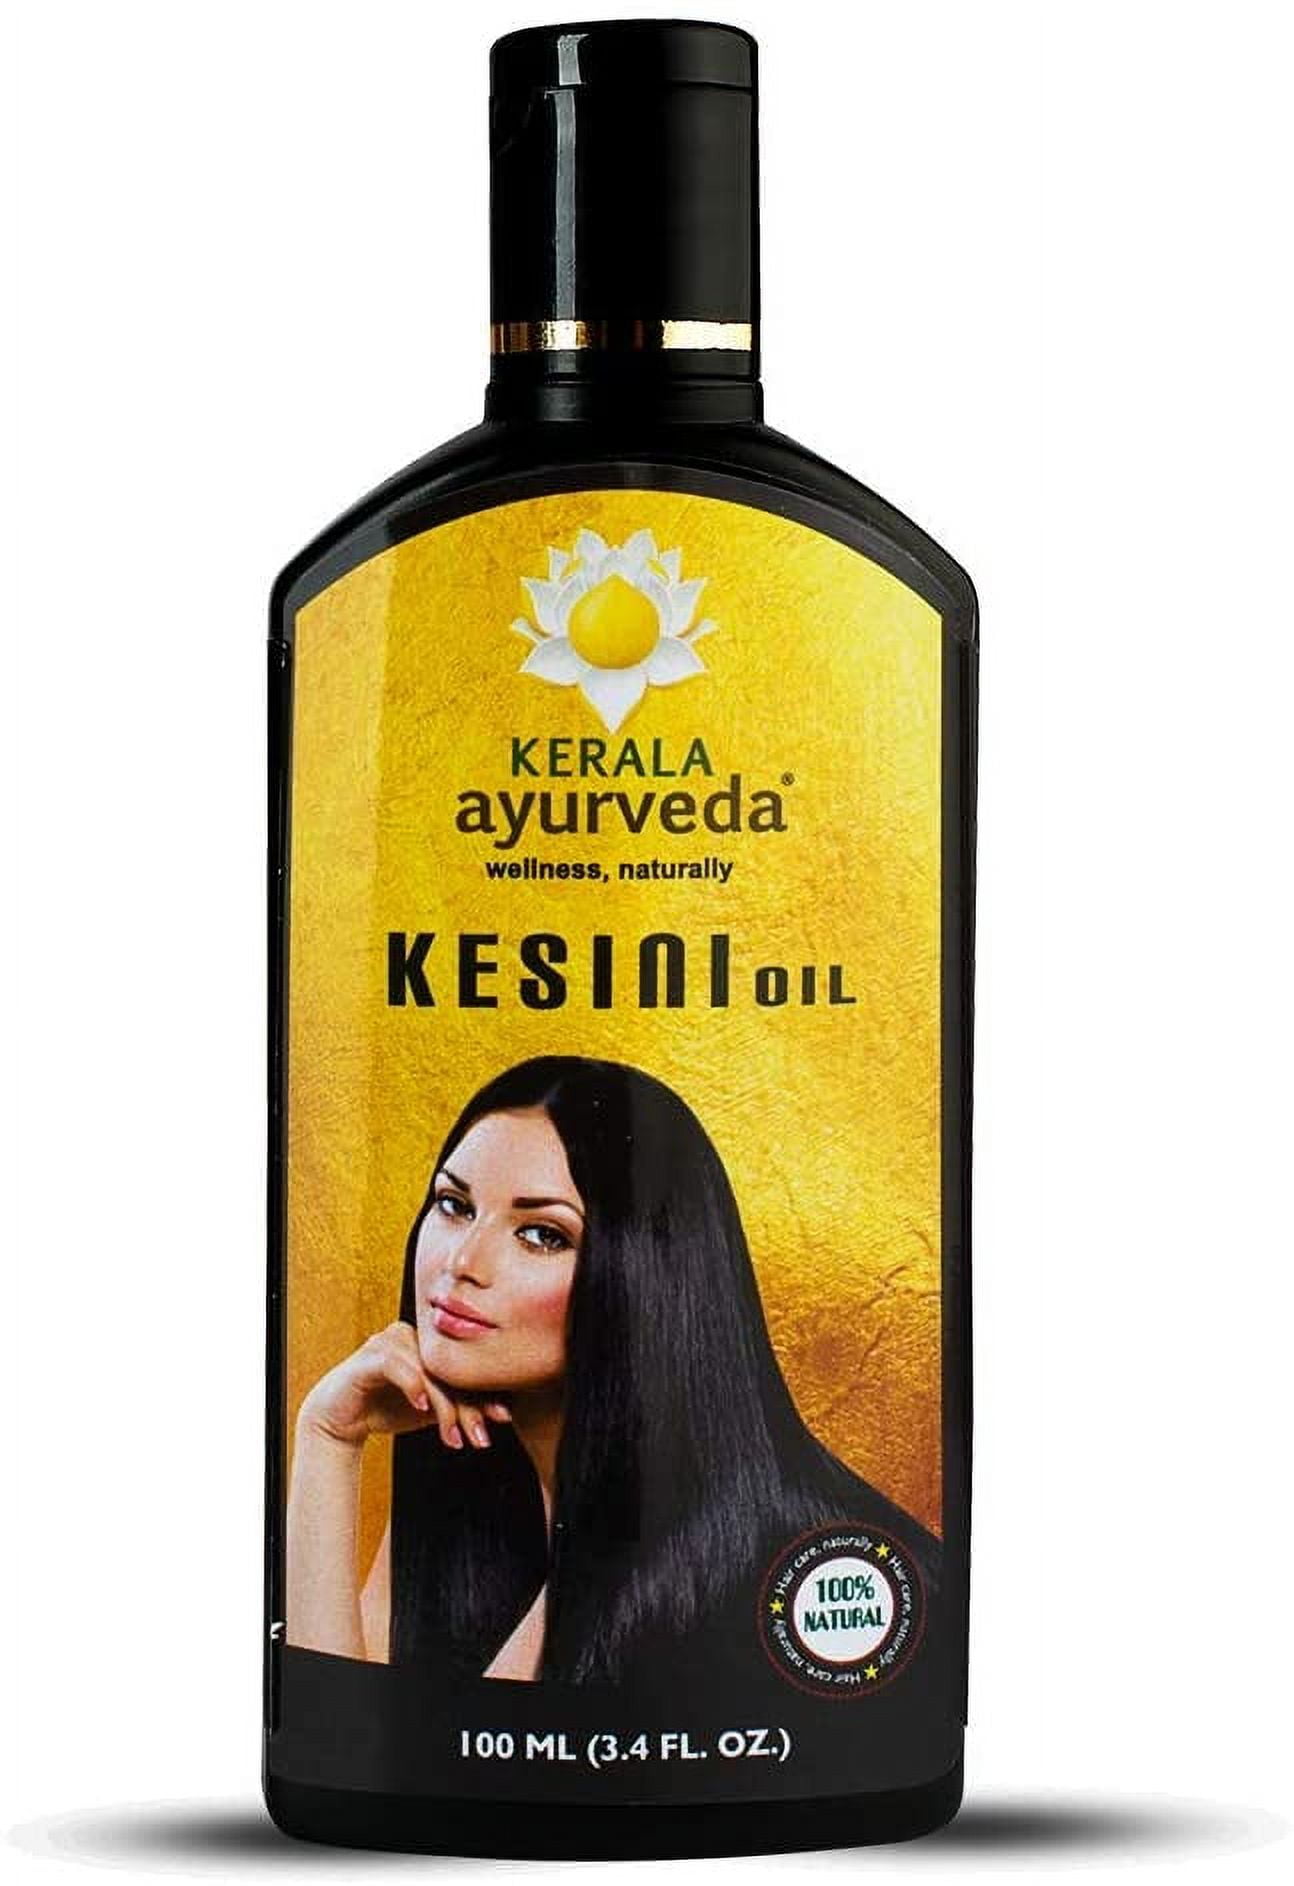 Kerala Ayurveda Kesini Oil Herbal Hair Oil Enriched with Amla and Bacopa Revitalises Scalp Maintains Natural Color Texture of Hair 3 38 Fl Oz d4b6e586 bd3b 4d4c 82e1 fa673c87dbf3.223f2886d2dc1c25c534f1510127e691